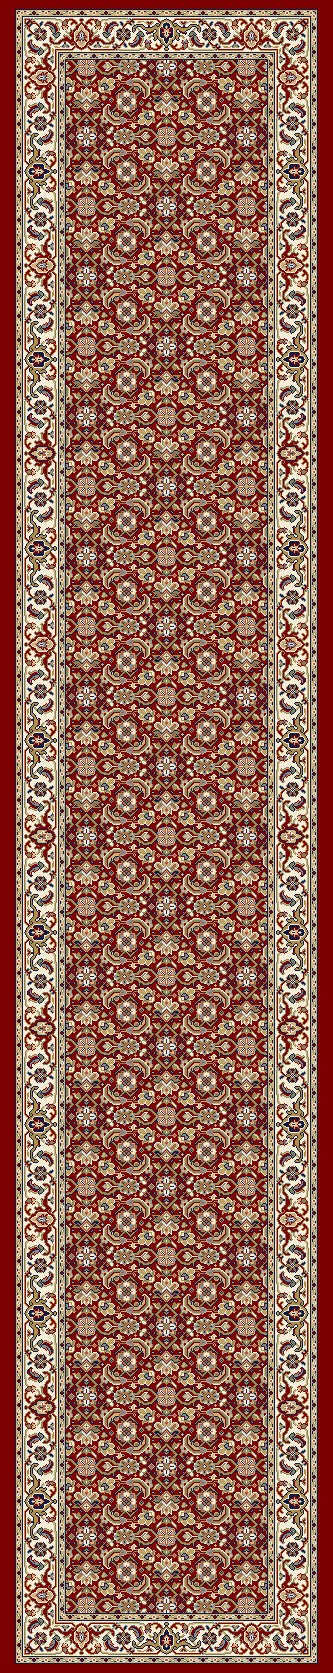 Ancient Garden 57011 Finished Runner Red/Ivory